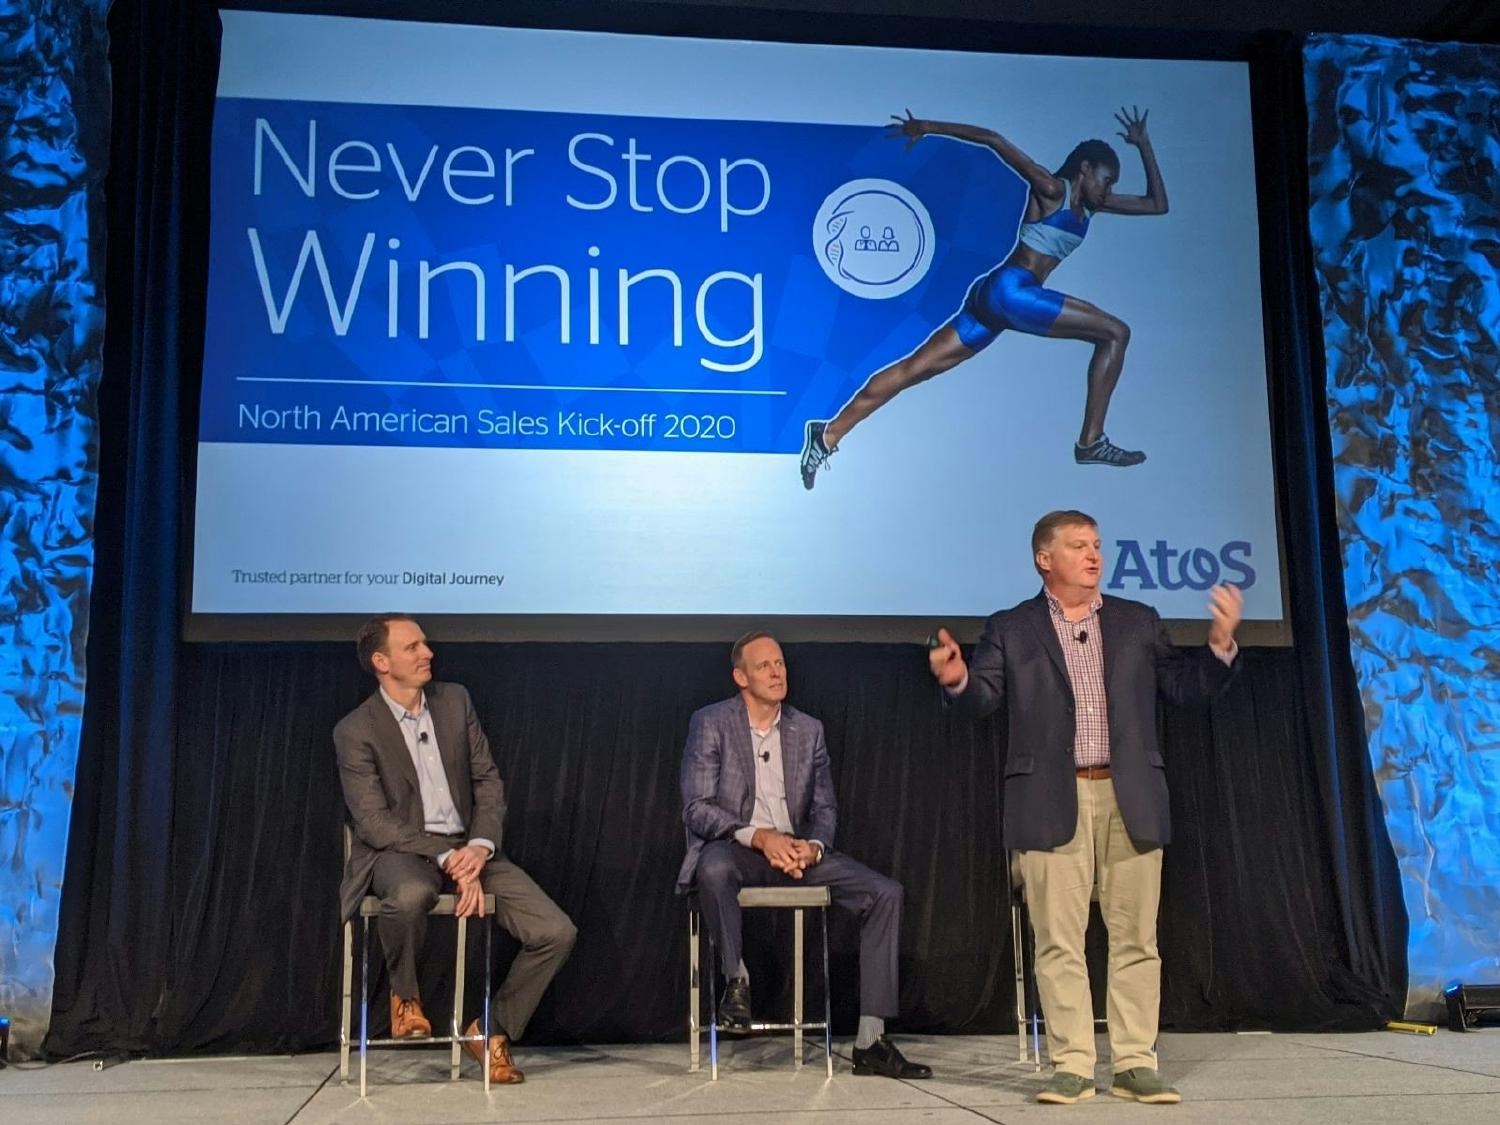 Prior to the pandemic hitting in 2020, our team was able to meet on-site in Texas for a sales kick-off with Atos.